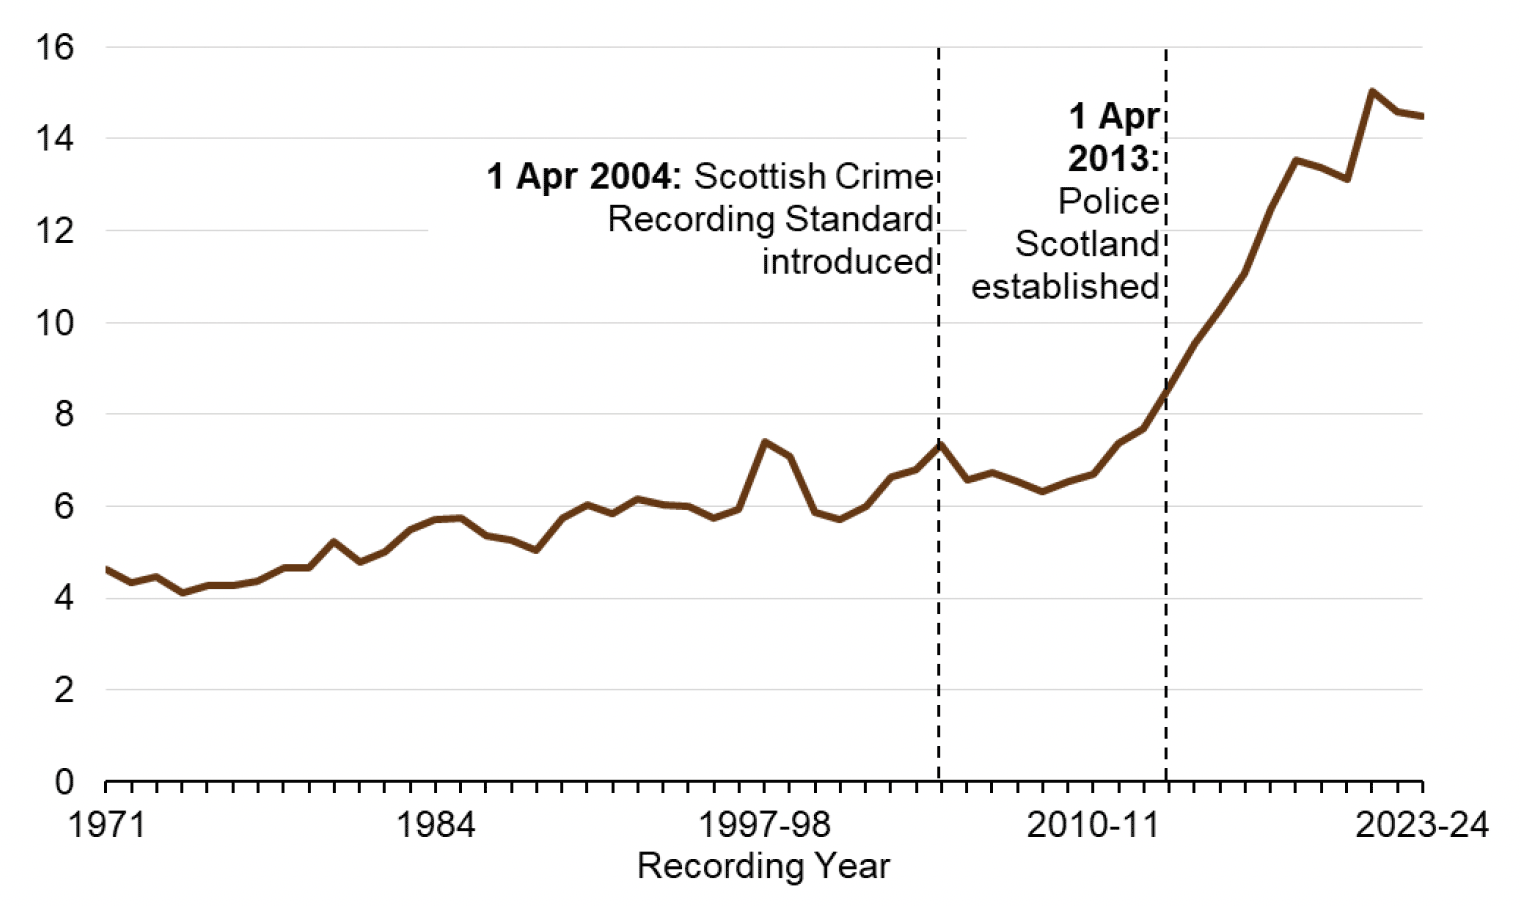 A line chart showing that Sexual crimes have increased from around 4,000 crimes per year in 1971 to over 14,000 in 2023-24. The rate of increase has sped up since 2010-11 when they were around 6,000. The lowest recorded level was in 1974 and the highest recorded level was in 2021-22.